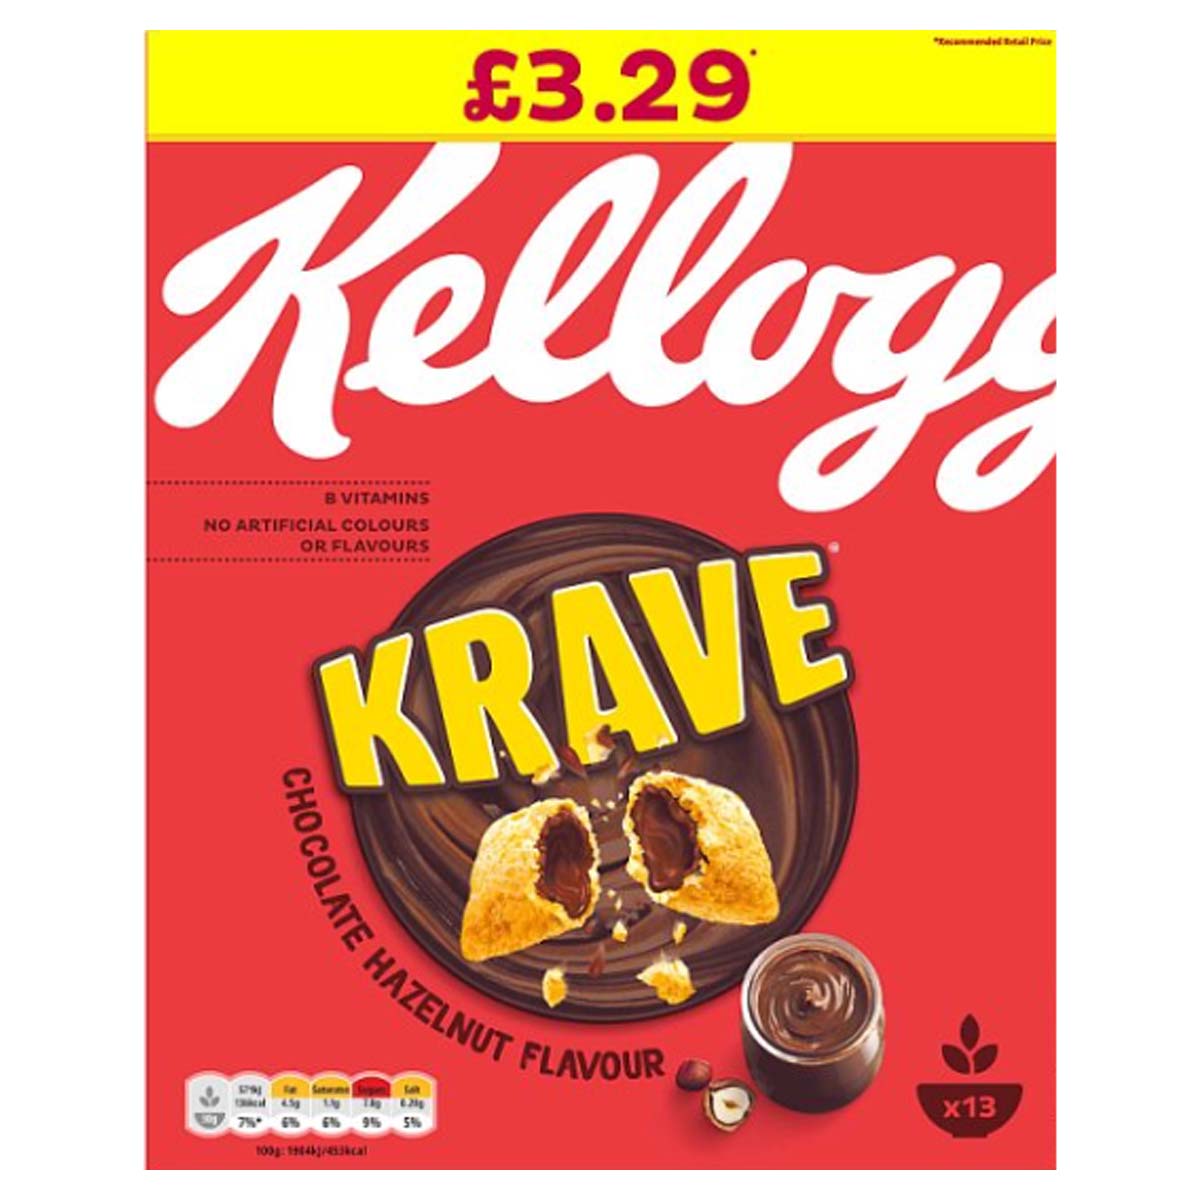 Kellogg's - Krave Chocolate Hazelnut Flavour Cereal - 410g - Continental Food Store